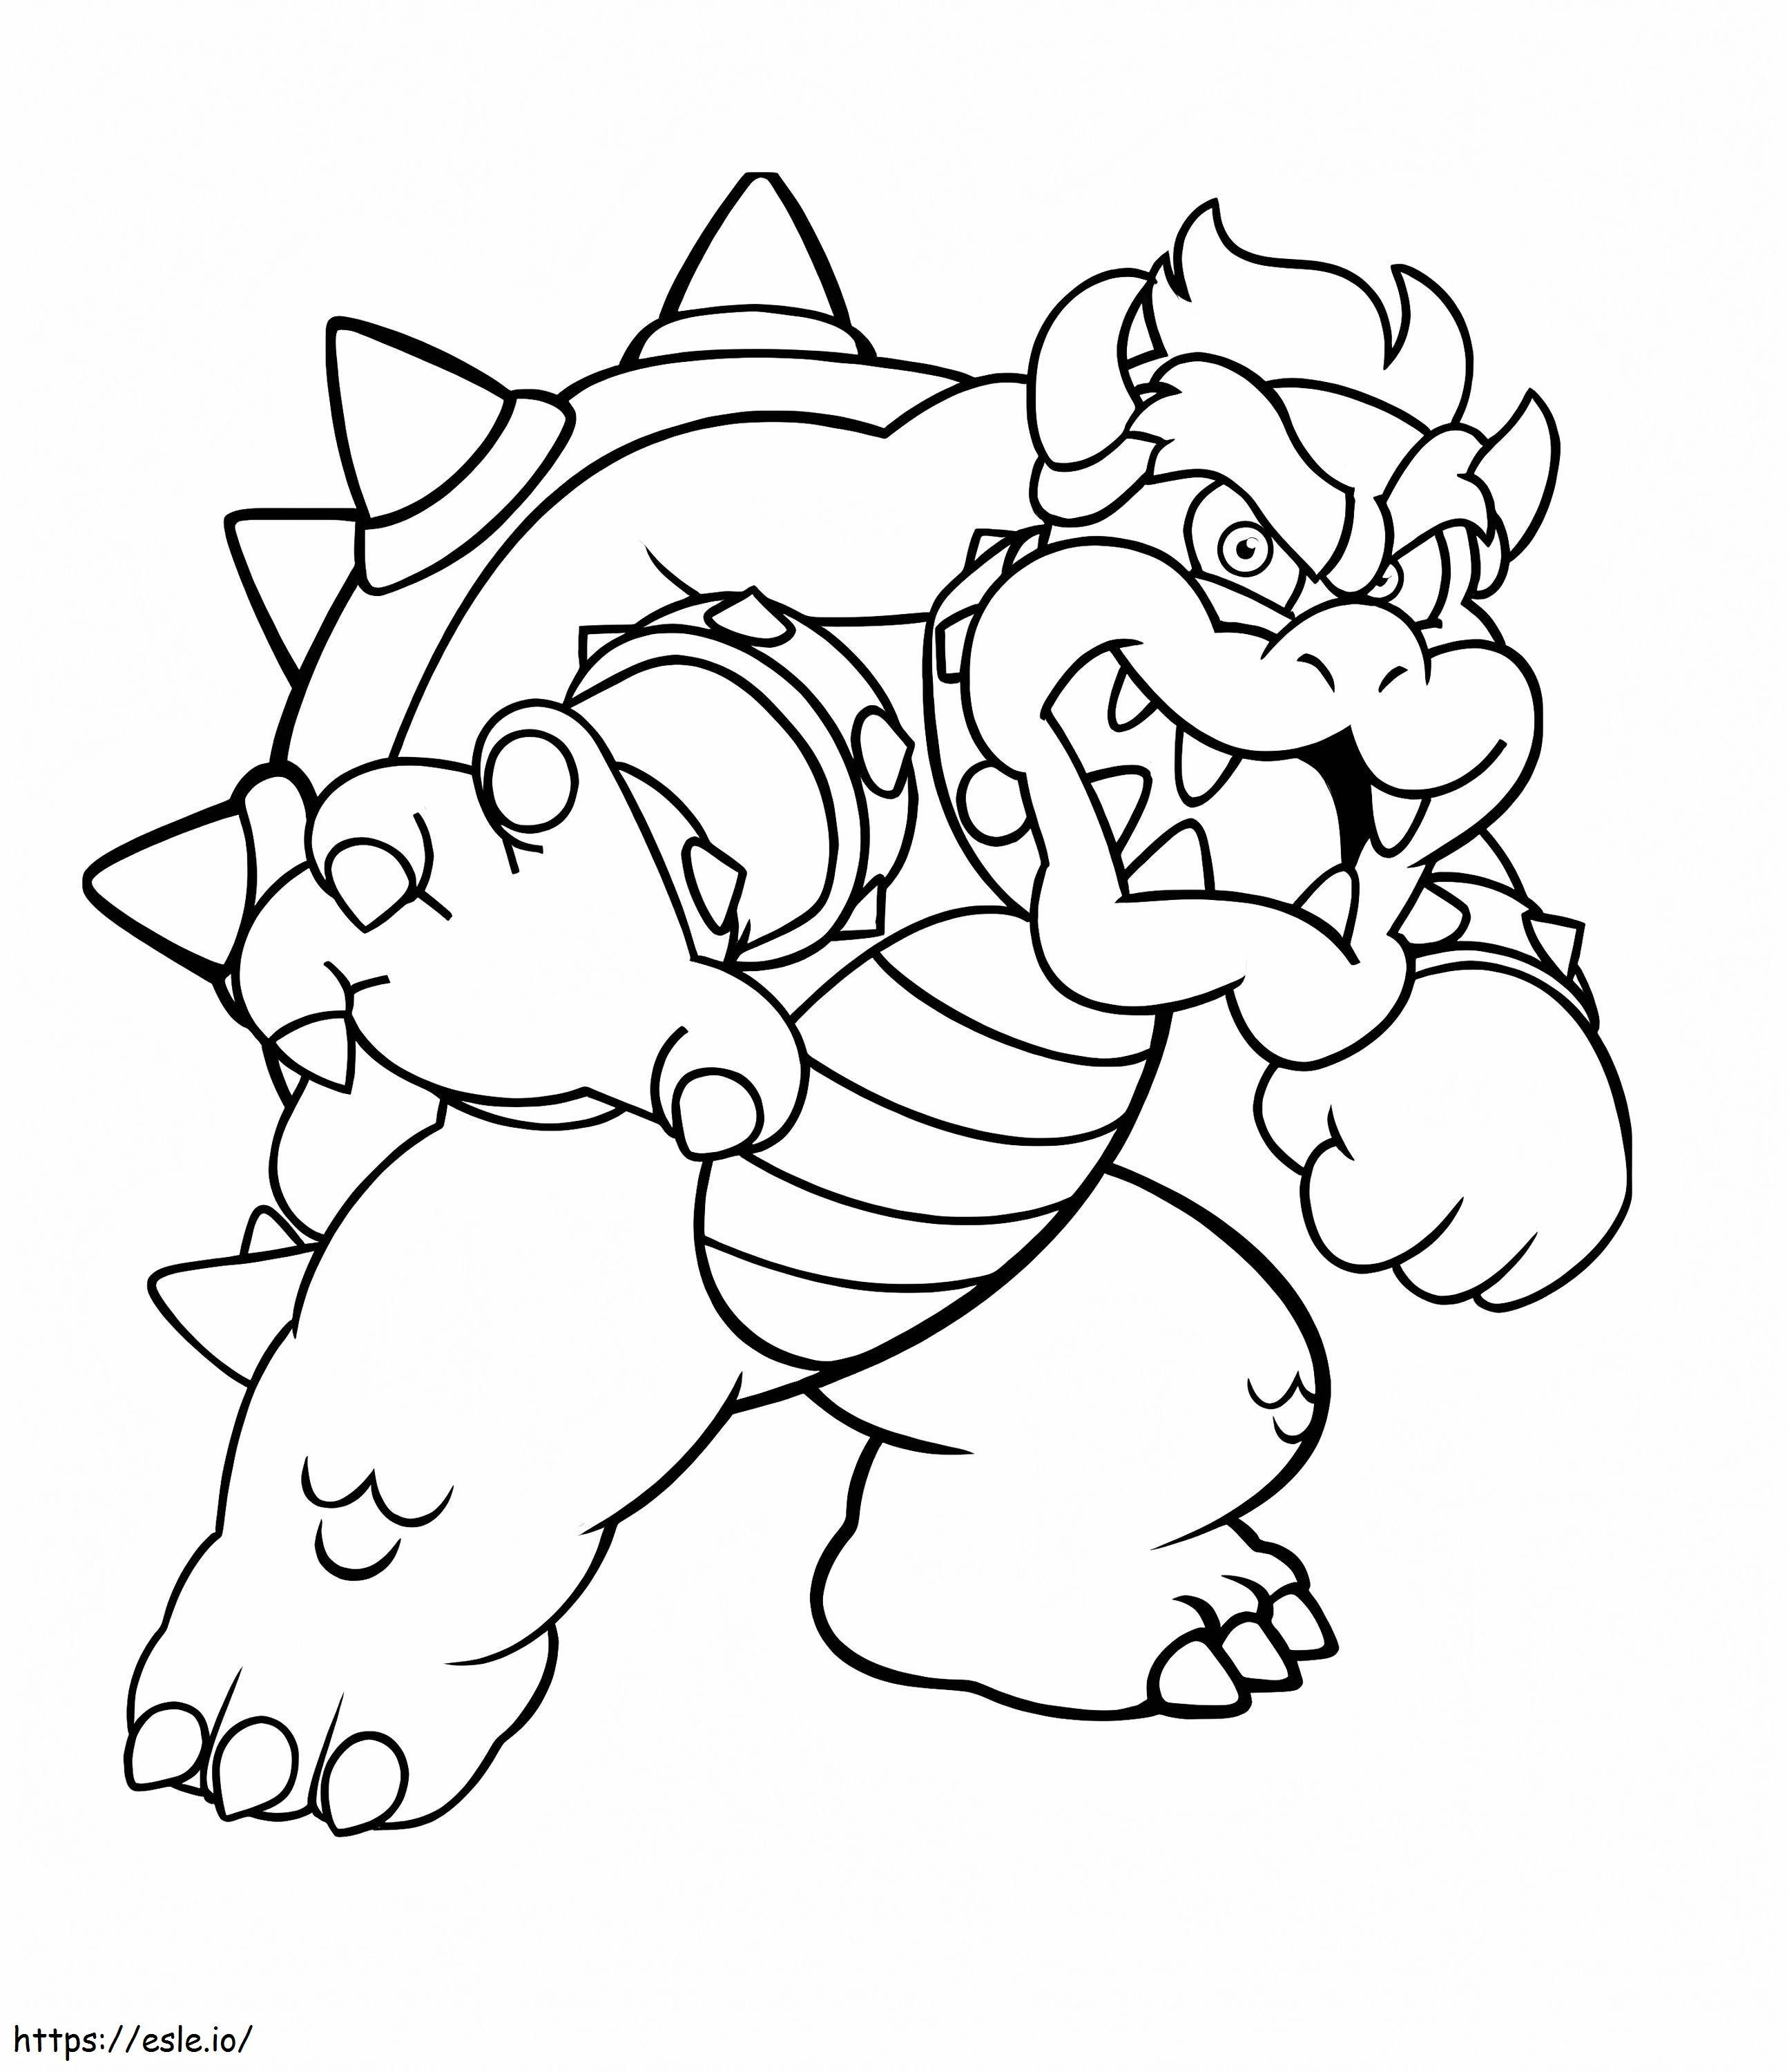 Angry Bowser coloring page